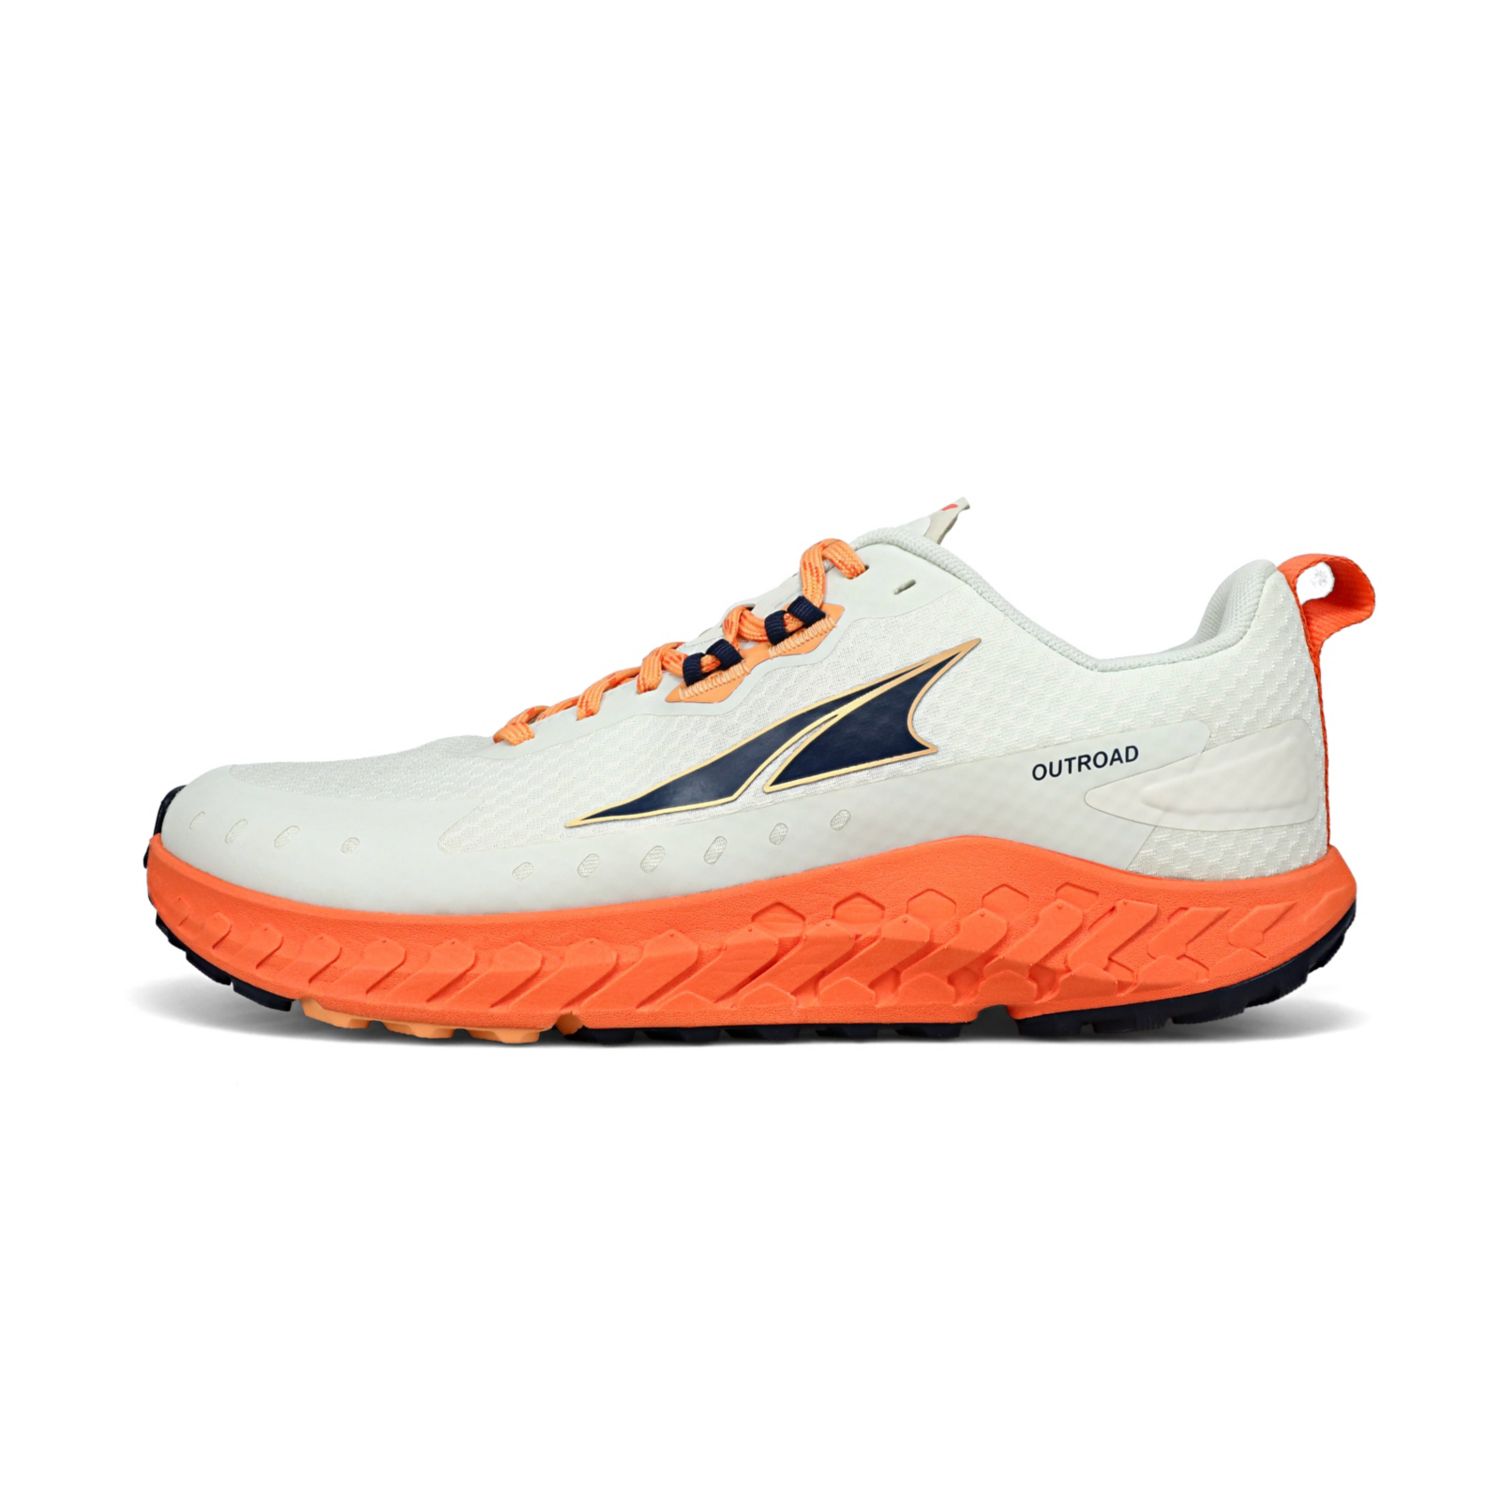 White / Orange Altra Outroad Men's Road Running Shoes | Ireland-70692159